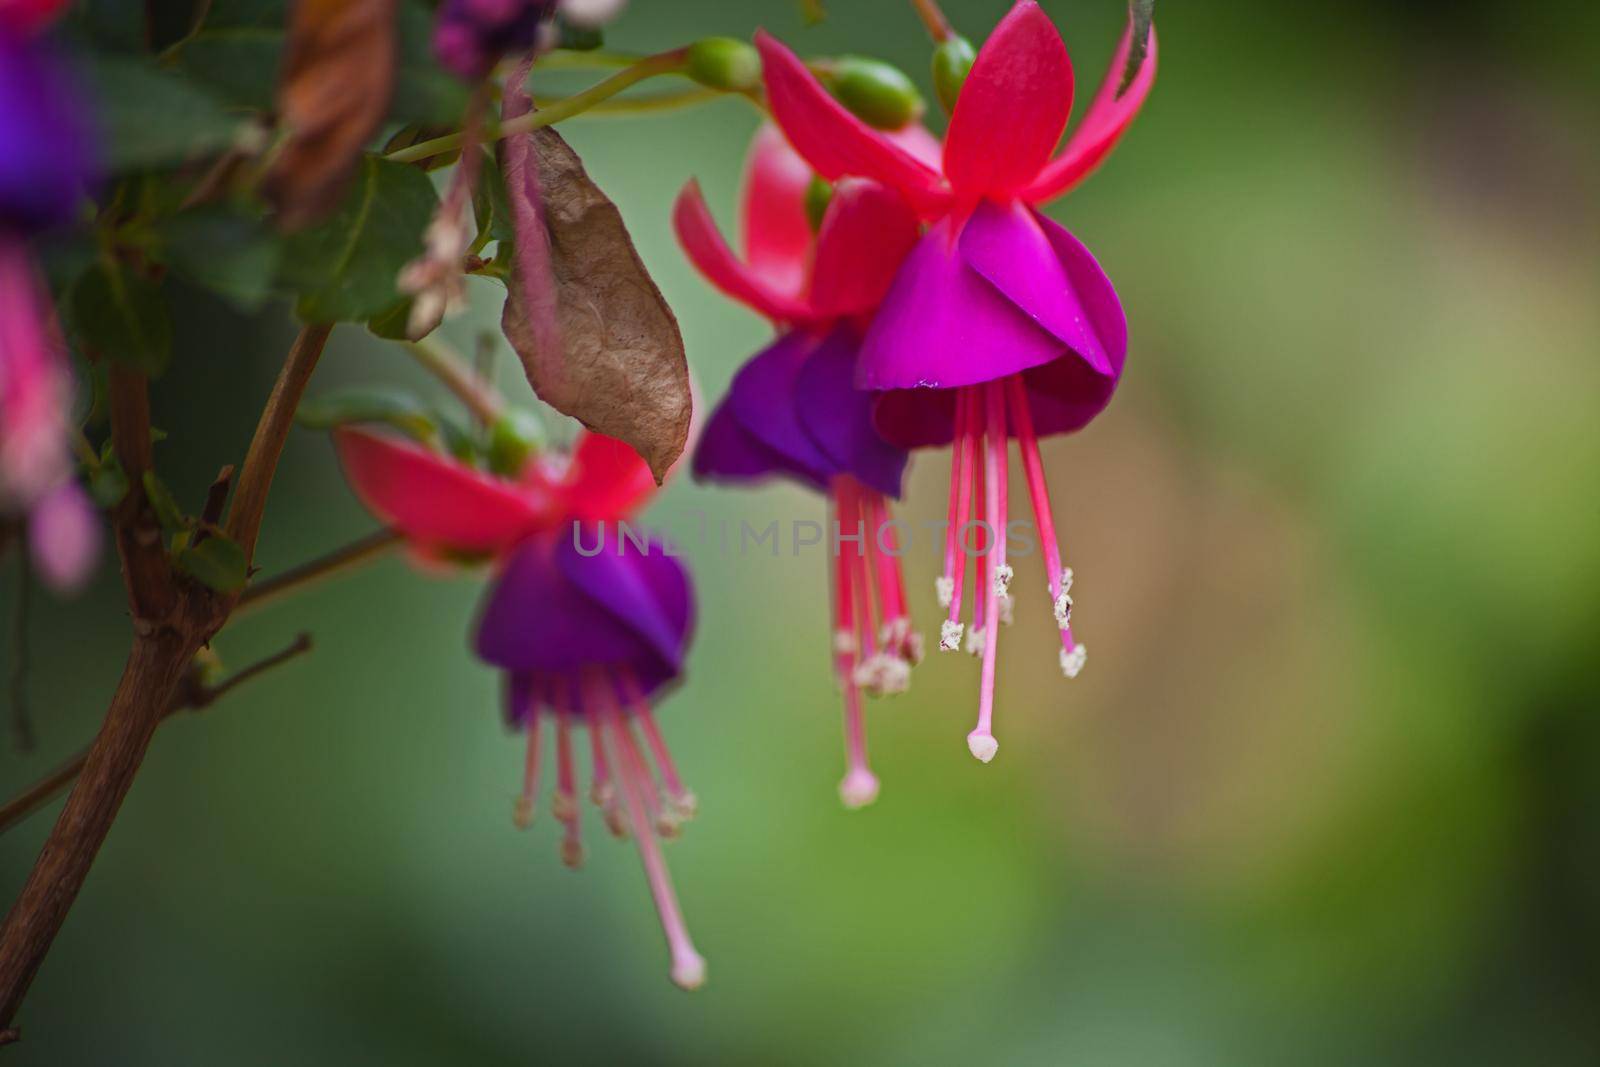 A macro image of the flowers of the Fuchsia plant